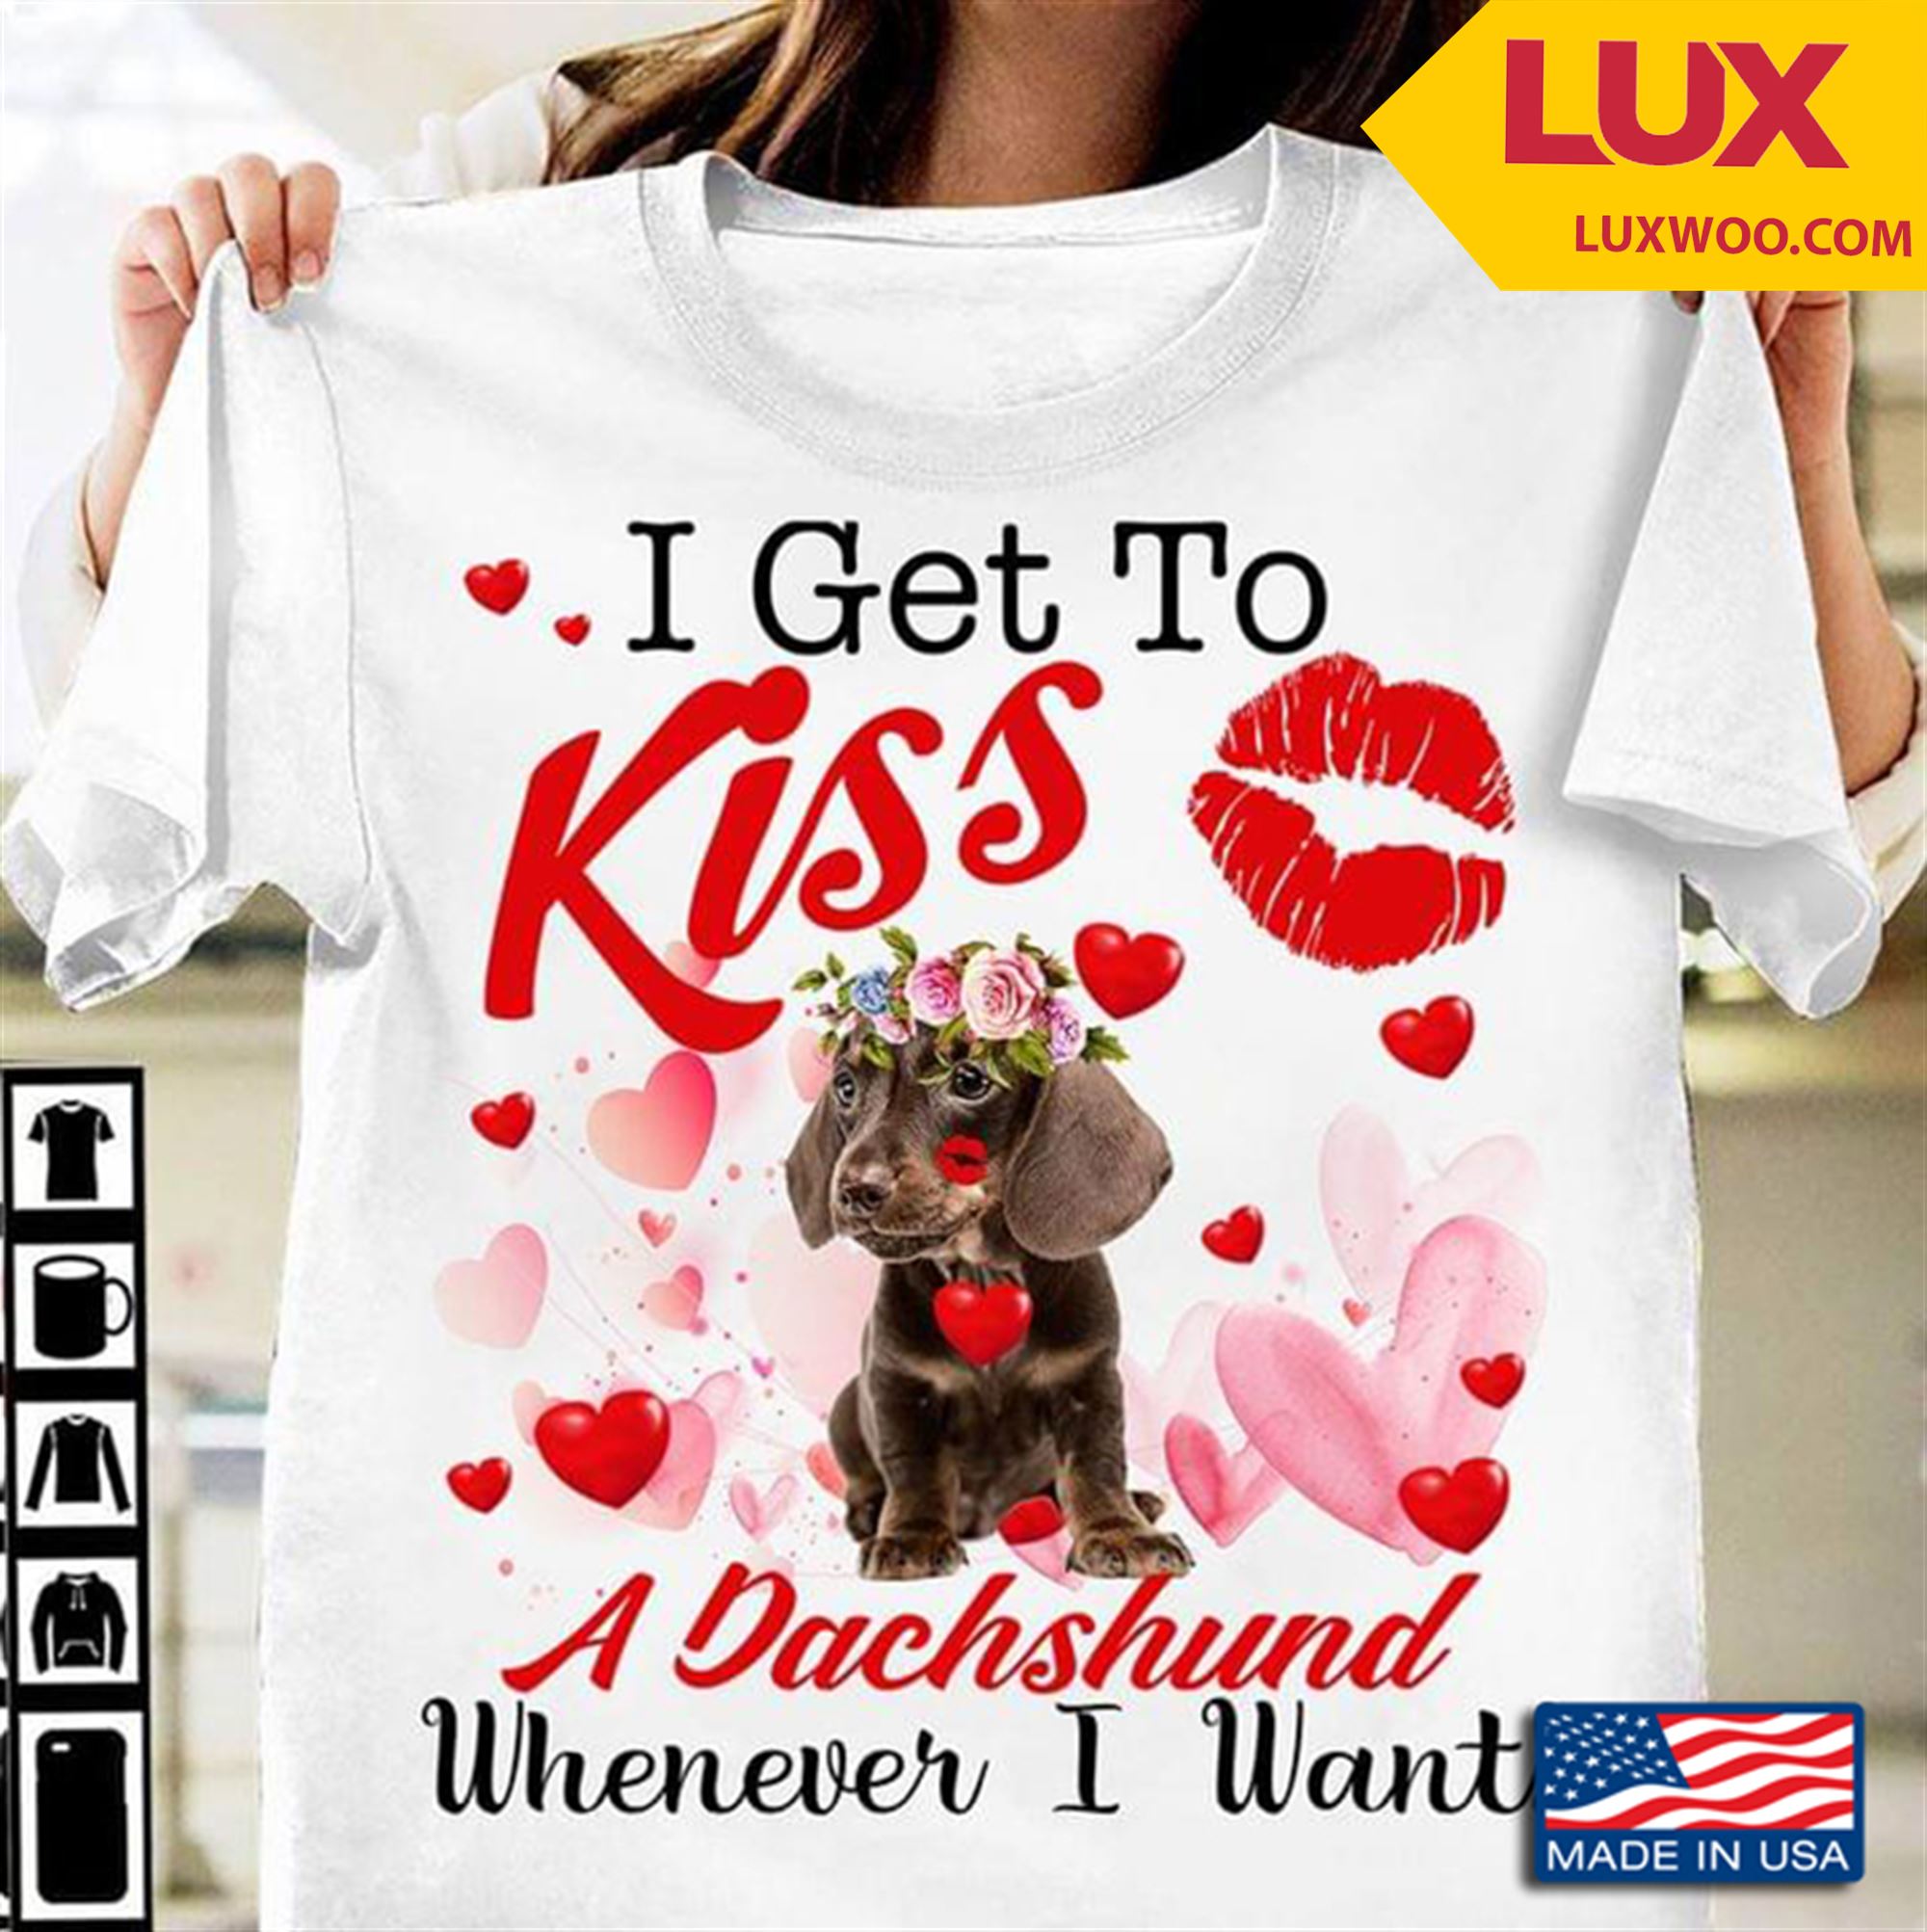 I Get To Kiss A Dachshund Whenever I Want Shirt Size Up To 5xl